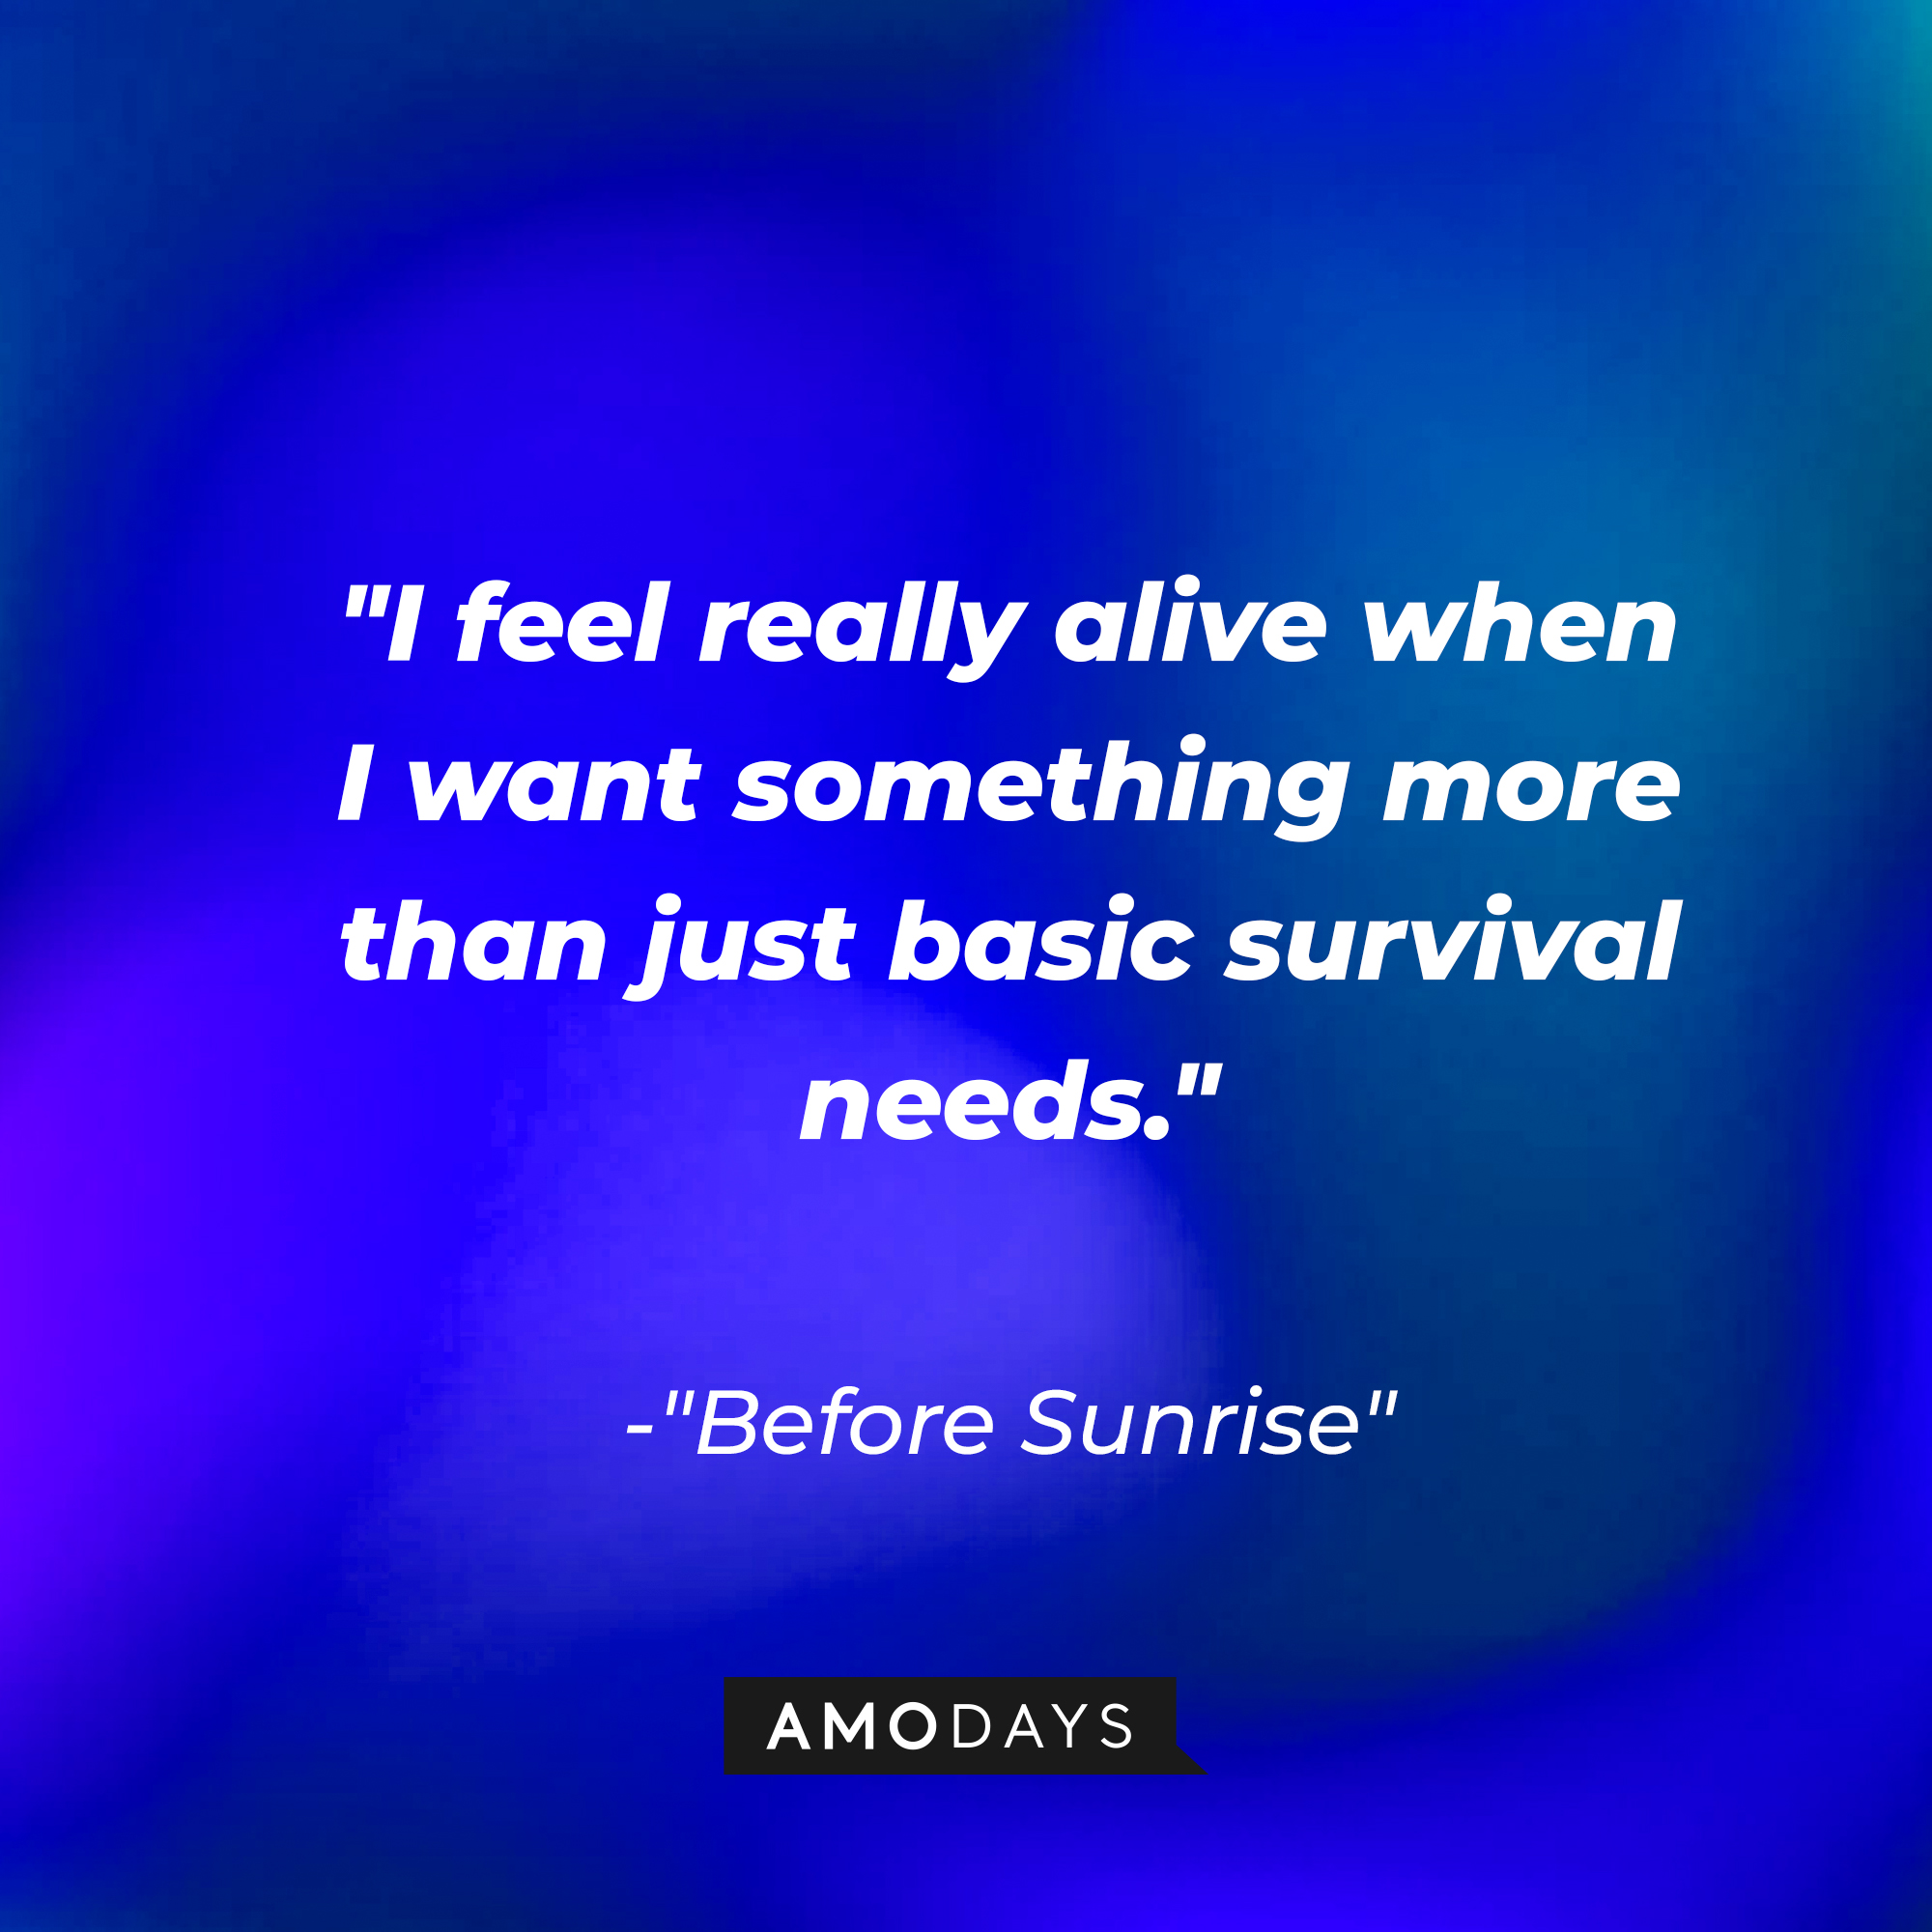 "I feel really alive when I want something more than just basic survival needs." | Source: AmoDays